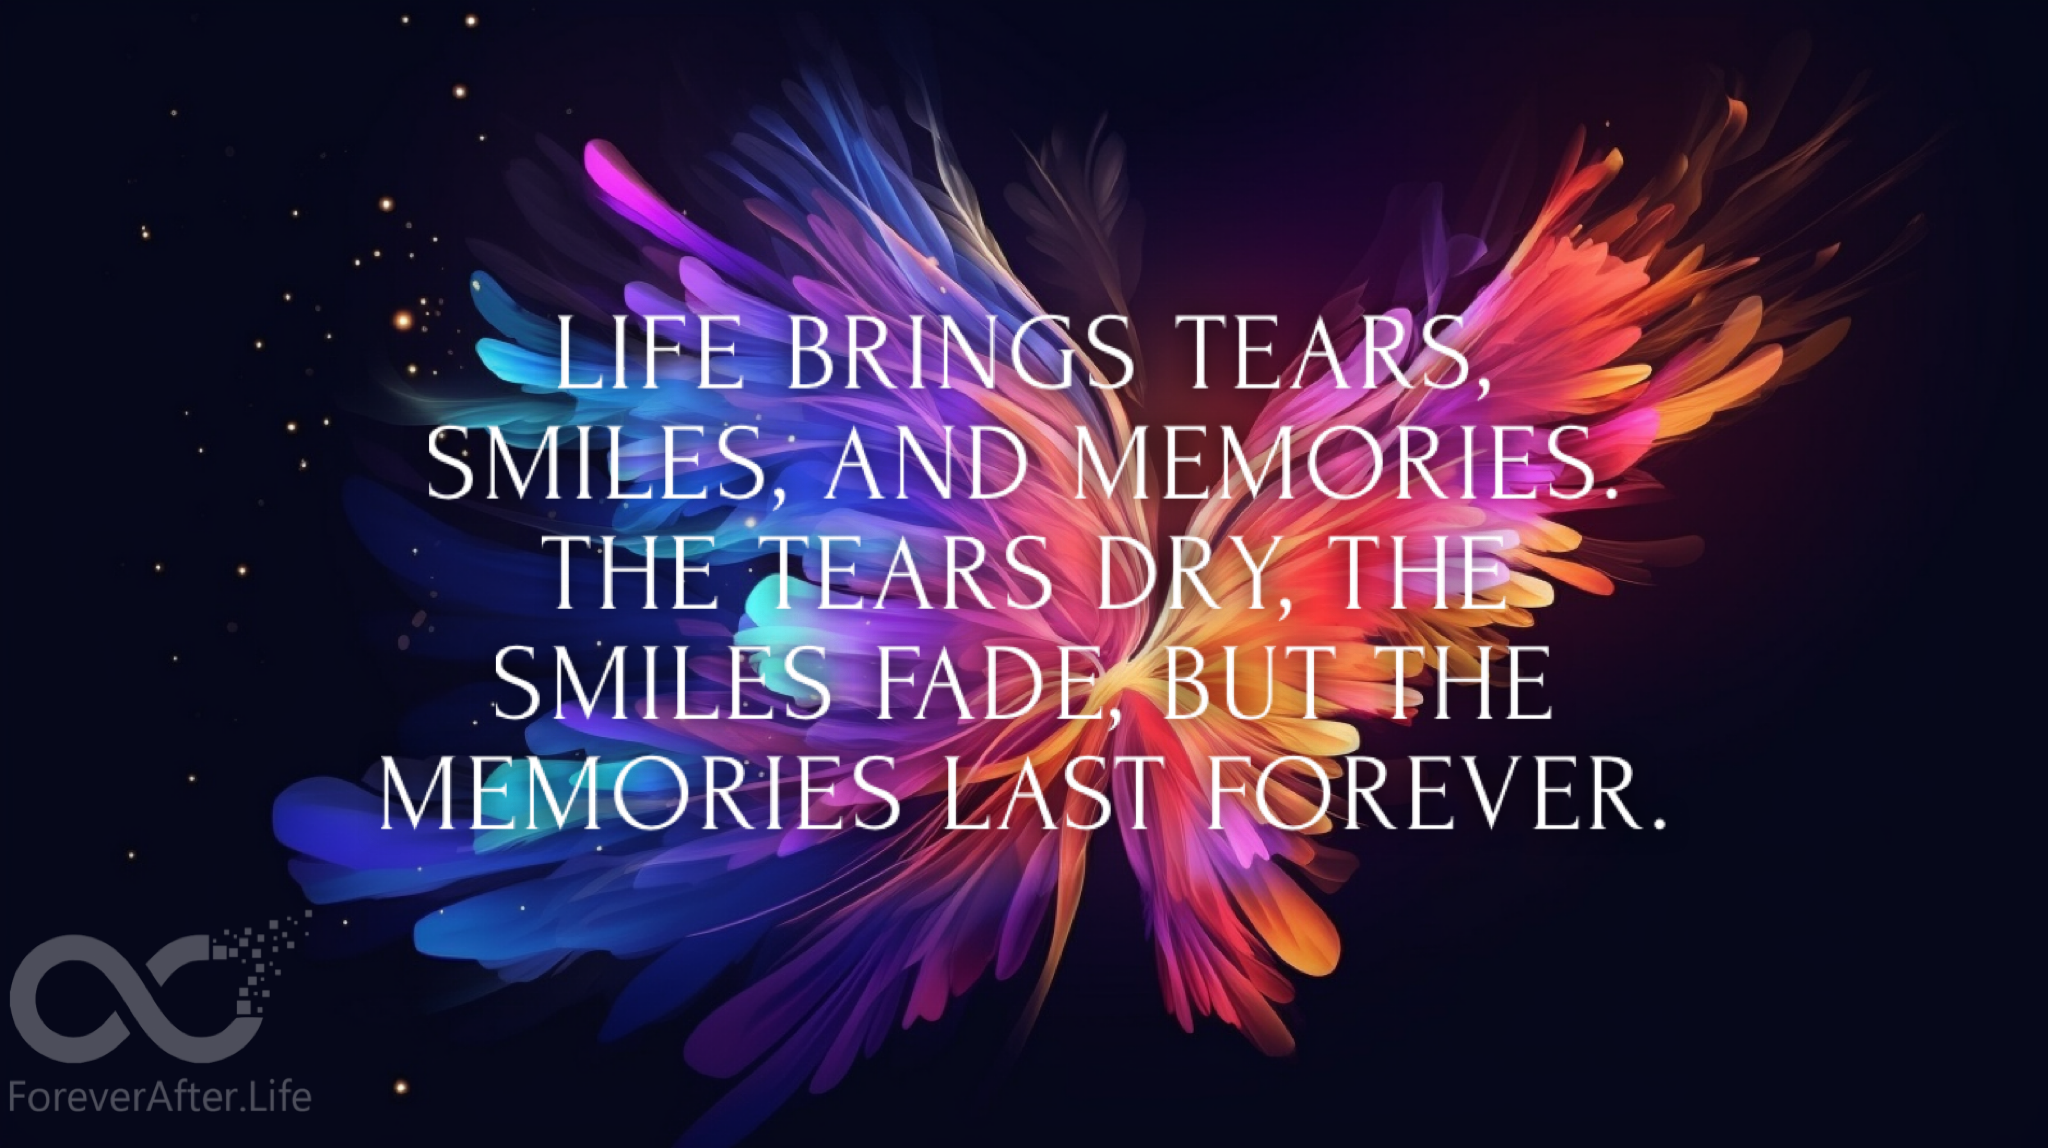 Life brings tears, smiles, and memories. The tears dry, the smiles fade, but the memories last forever